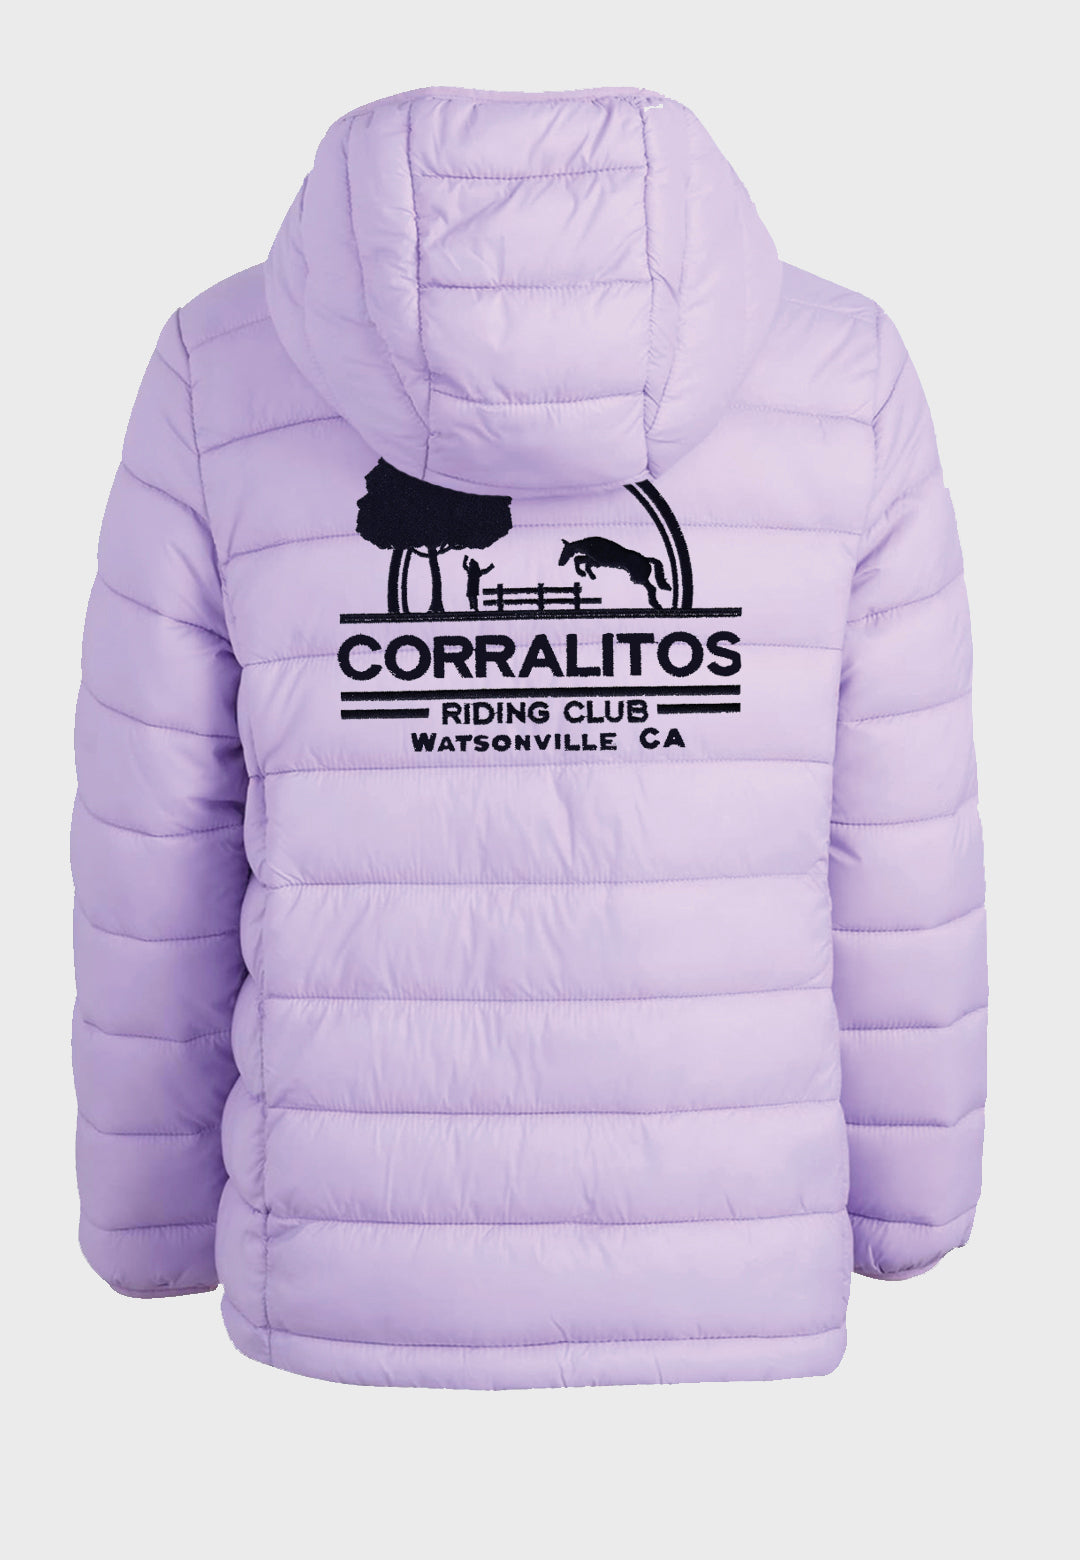 Corralitos Riding Club URBAN REPUBLIC Girls' Packable Water Resistant Bubble Puffer Jacket